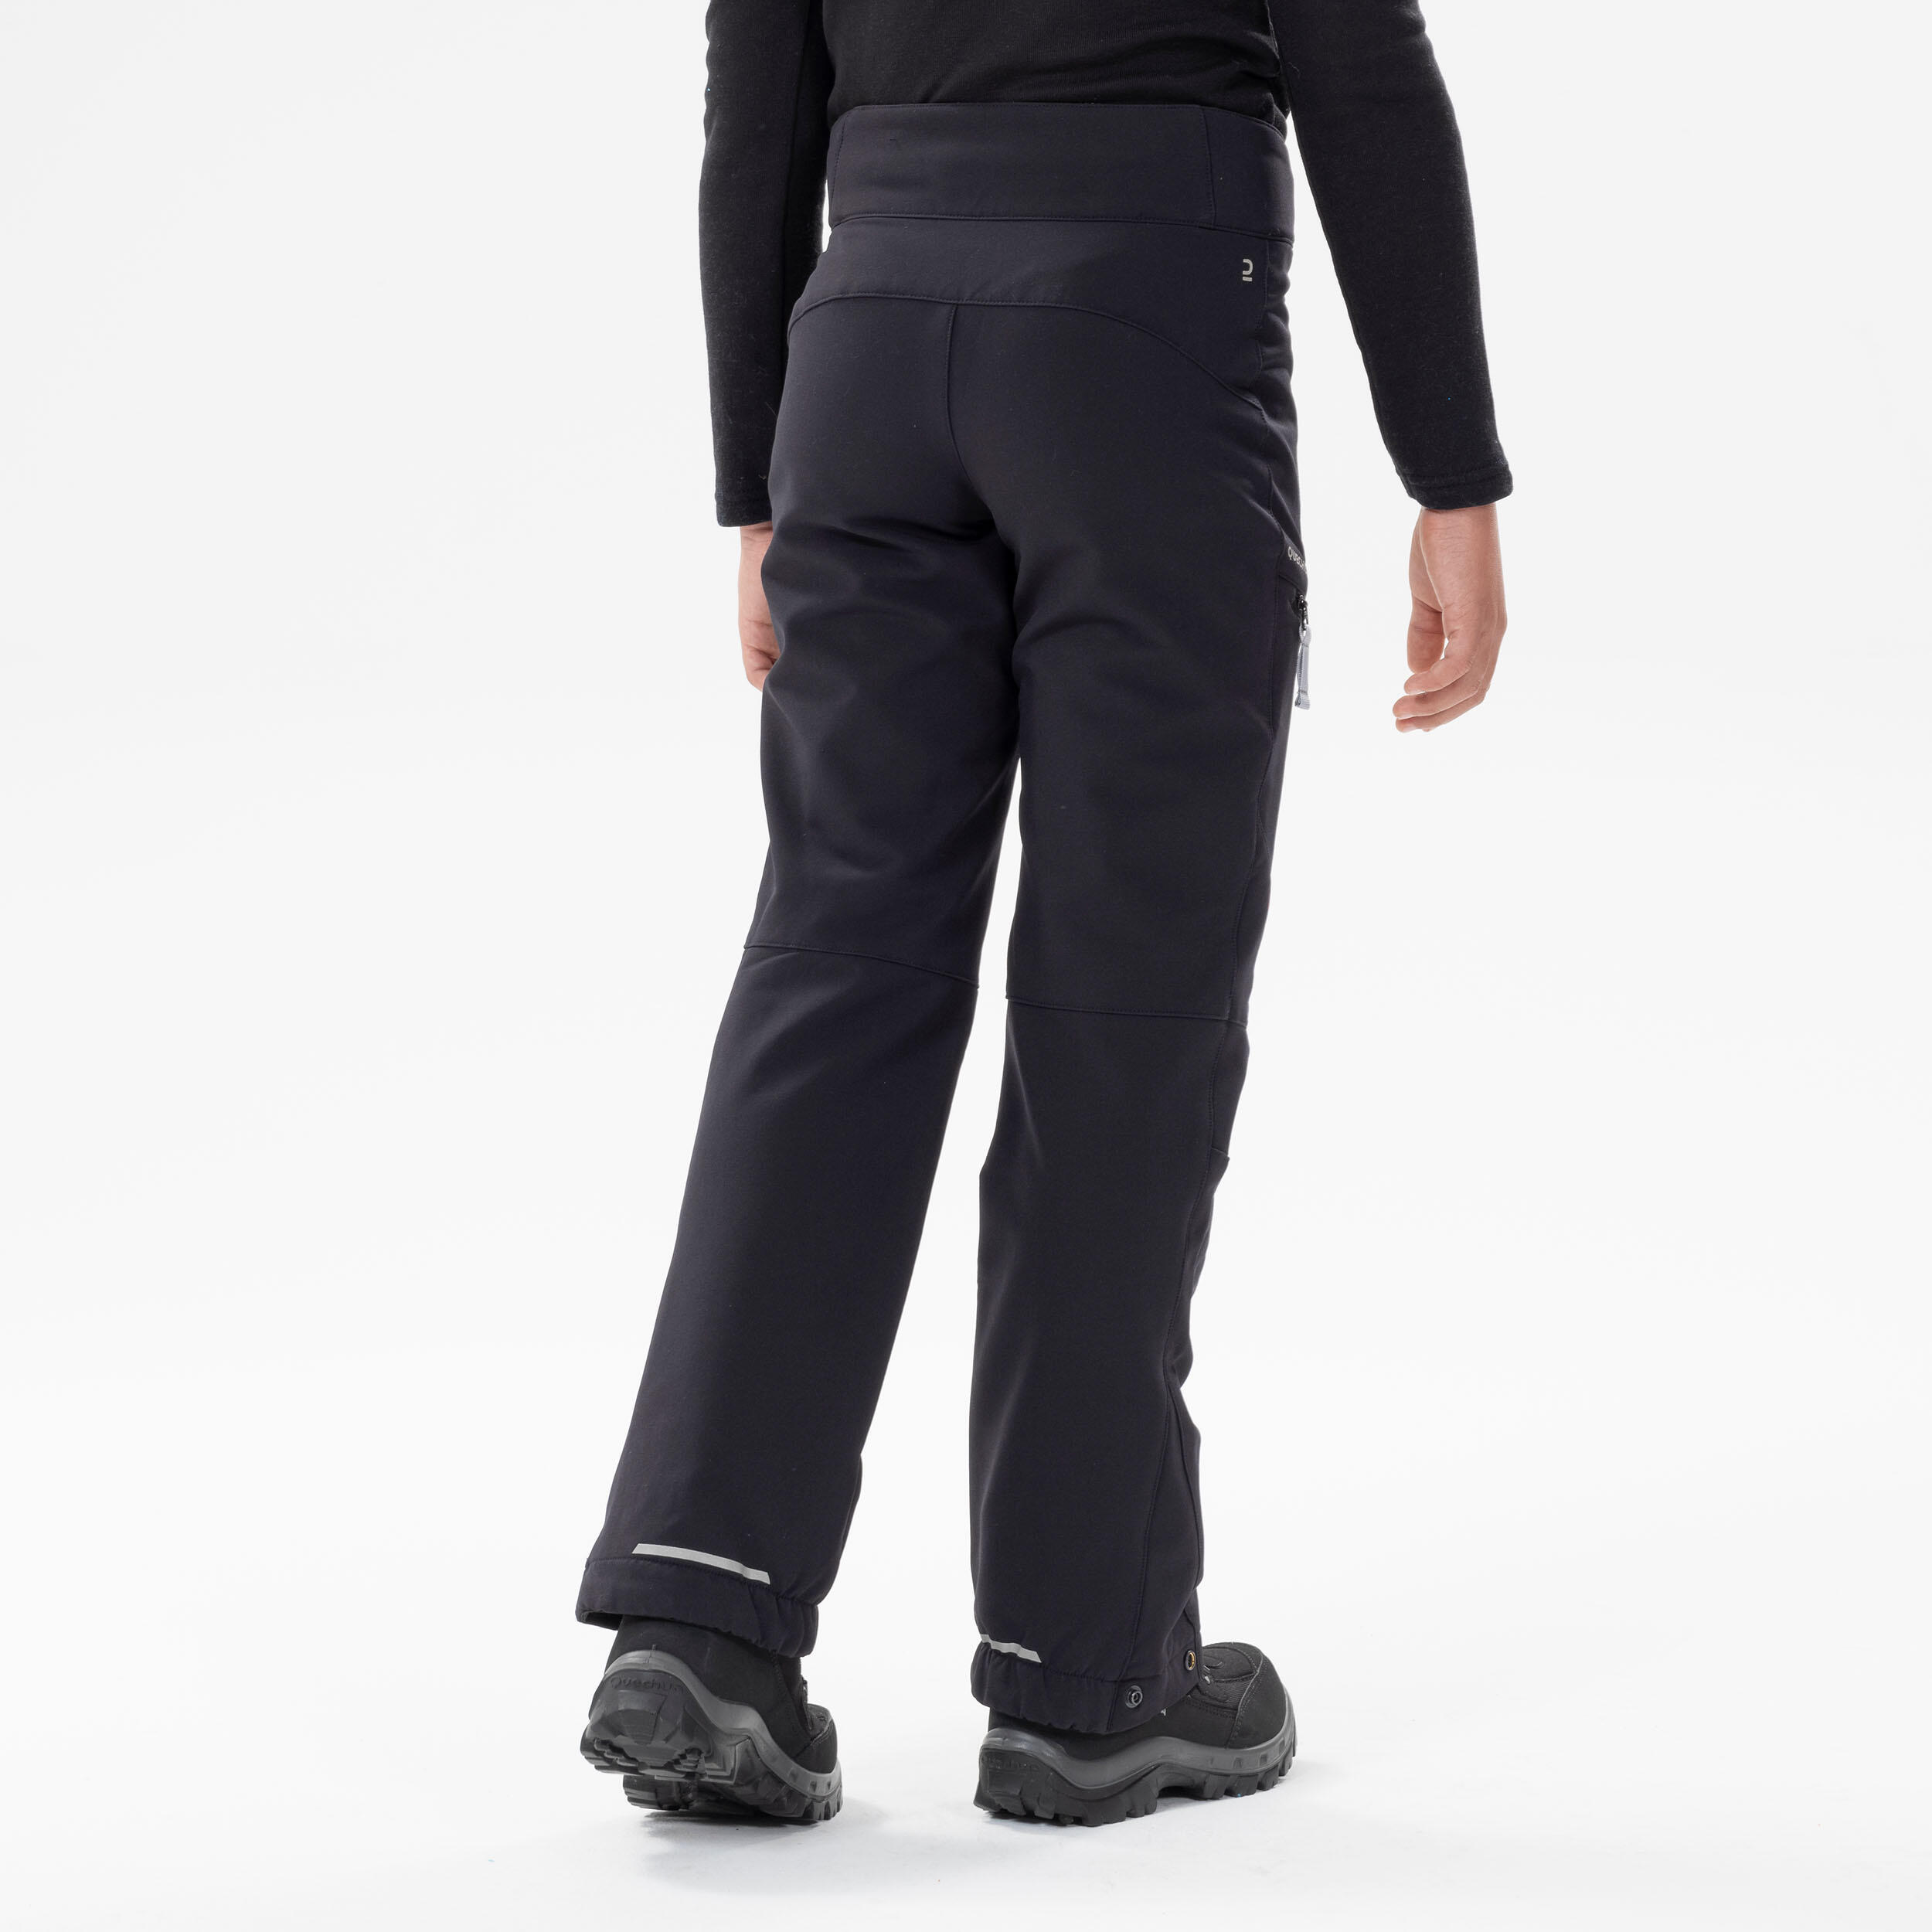 Kids’ Warm Hiking Softshell Trousers - SH500 Mountain - Ages 7-15 5/18